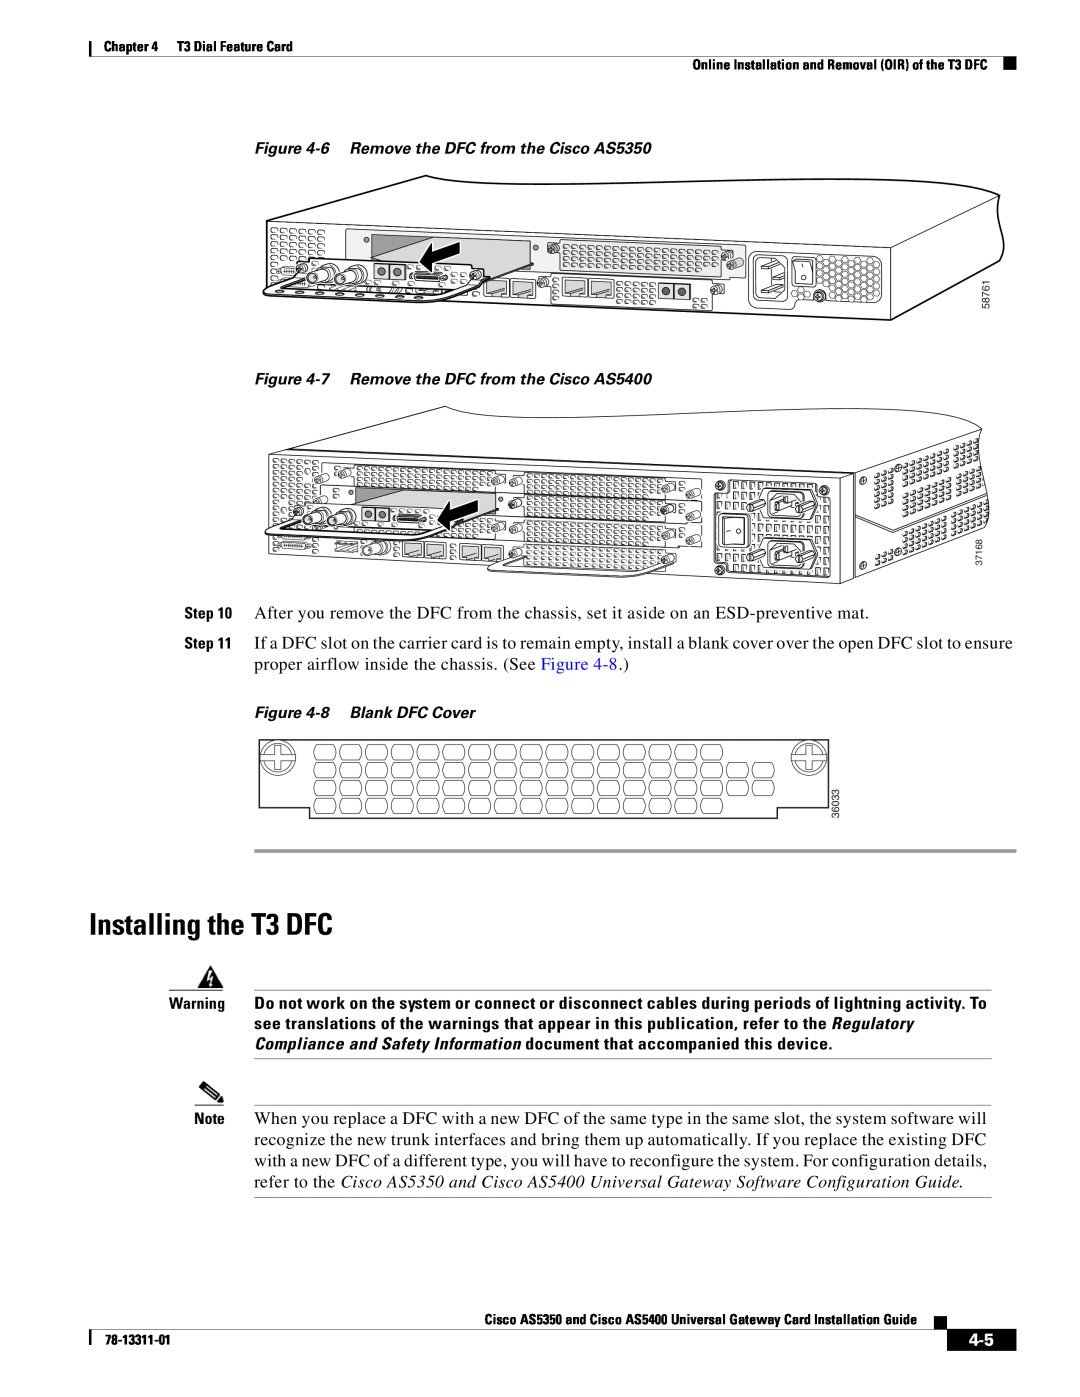 Cisco Systems Installing the T3 DFC, 6 Remove the DFC from the Cisco AS5350, 7 Remove the DFC from the Cisco AS5400 